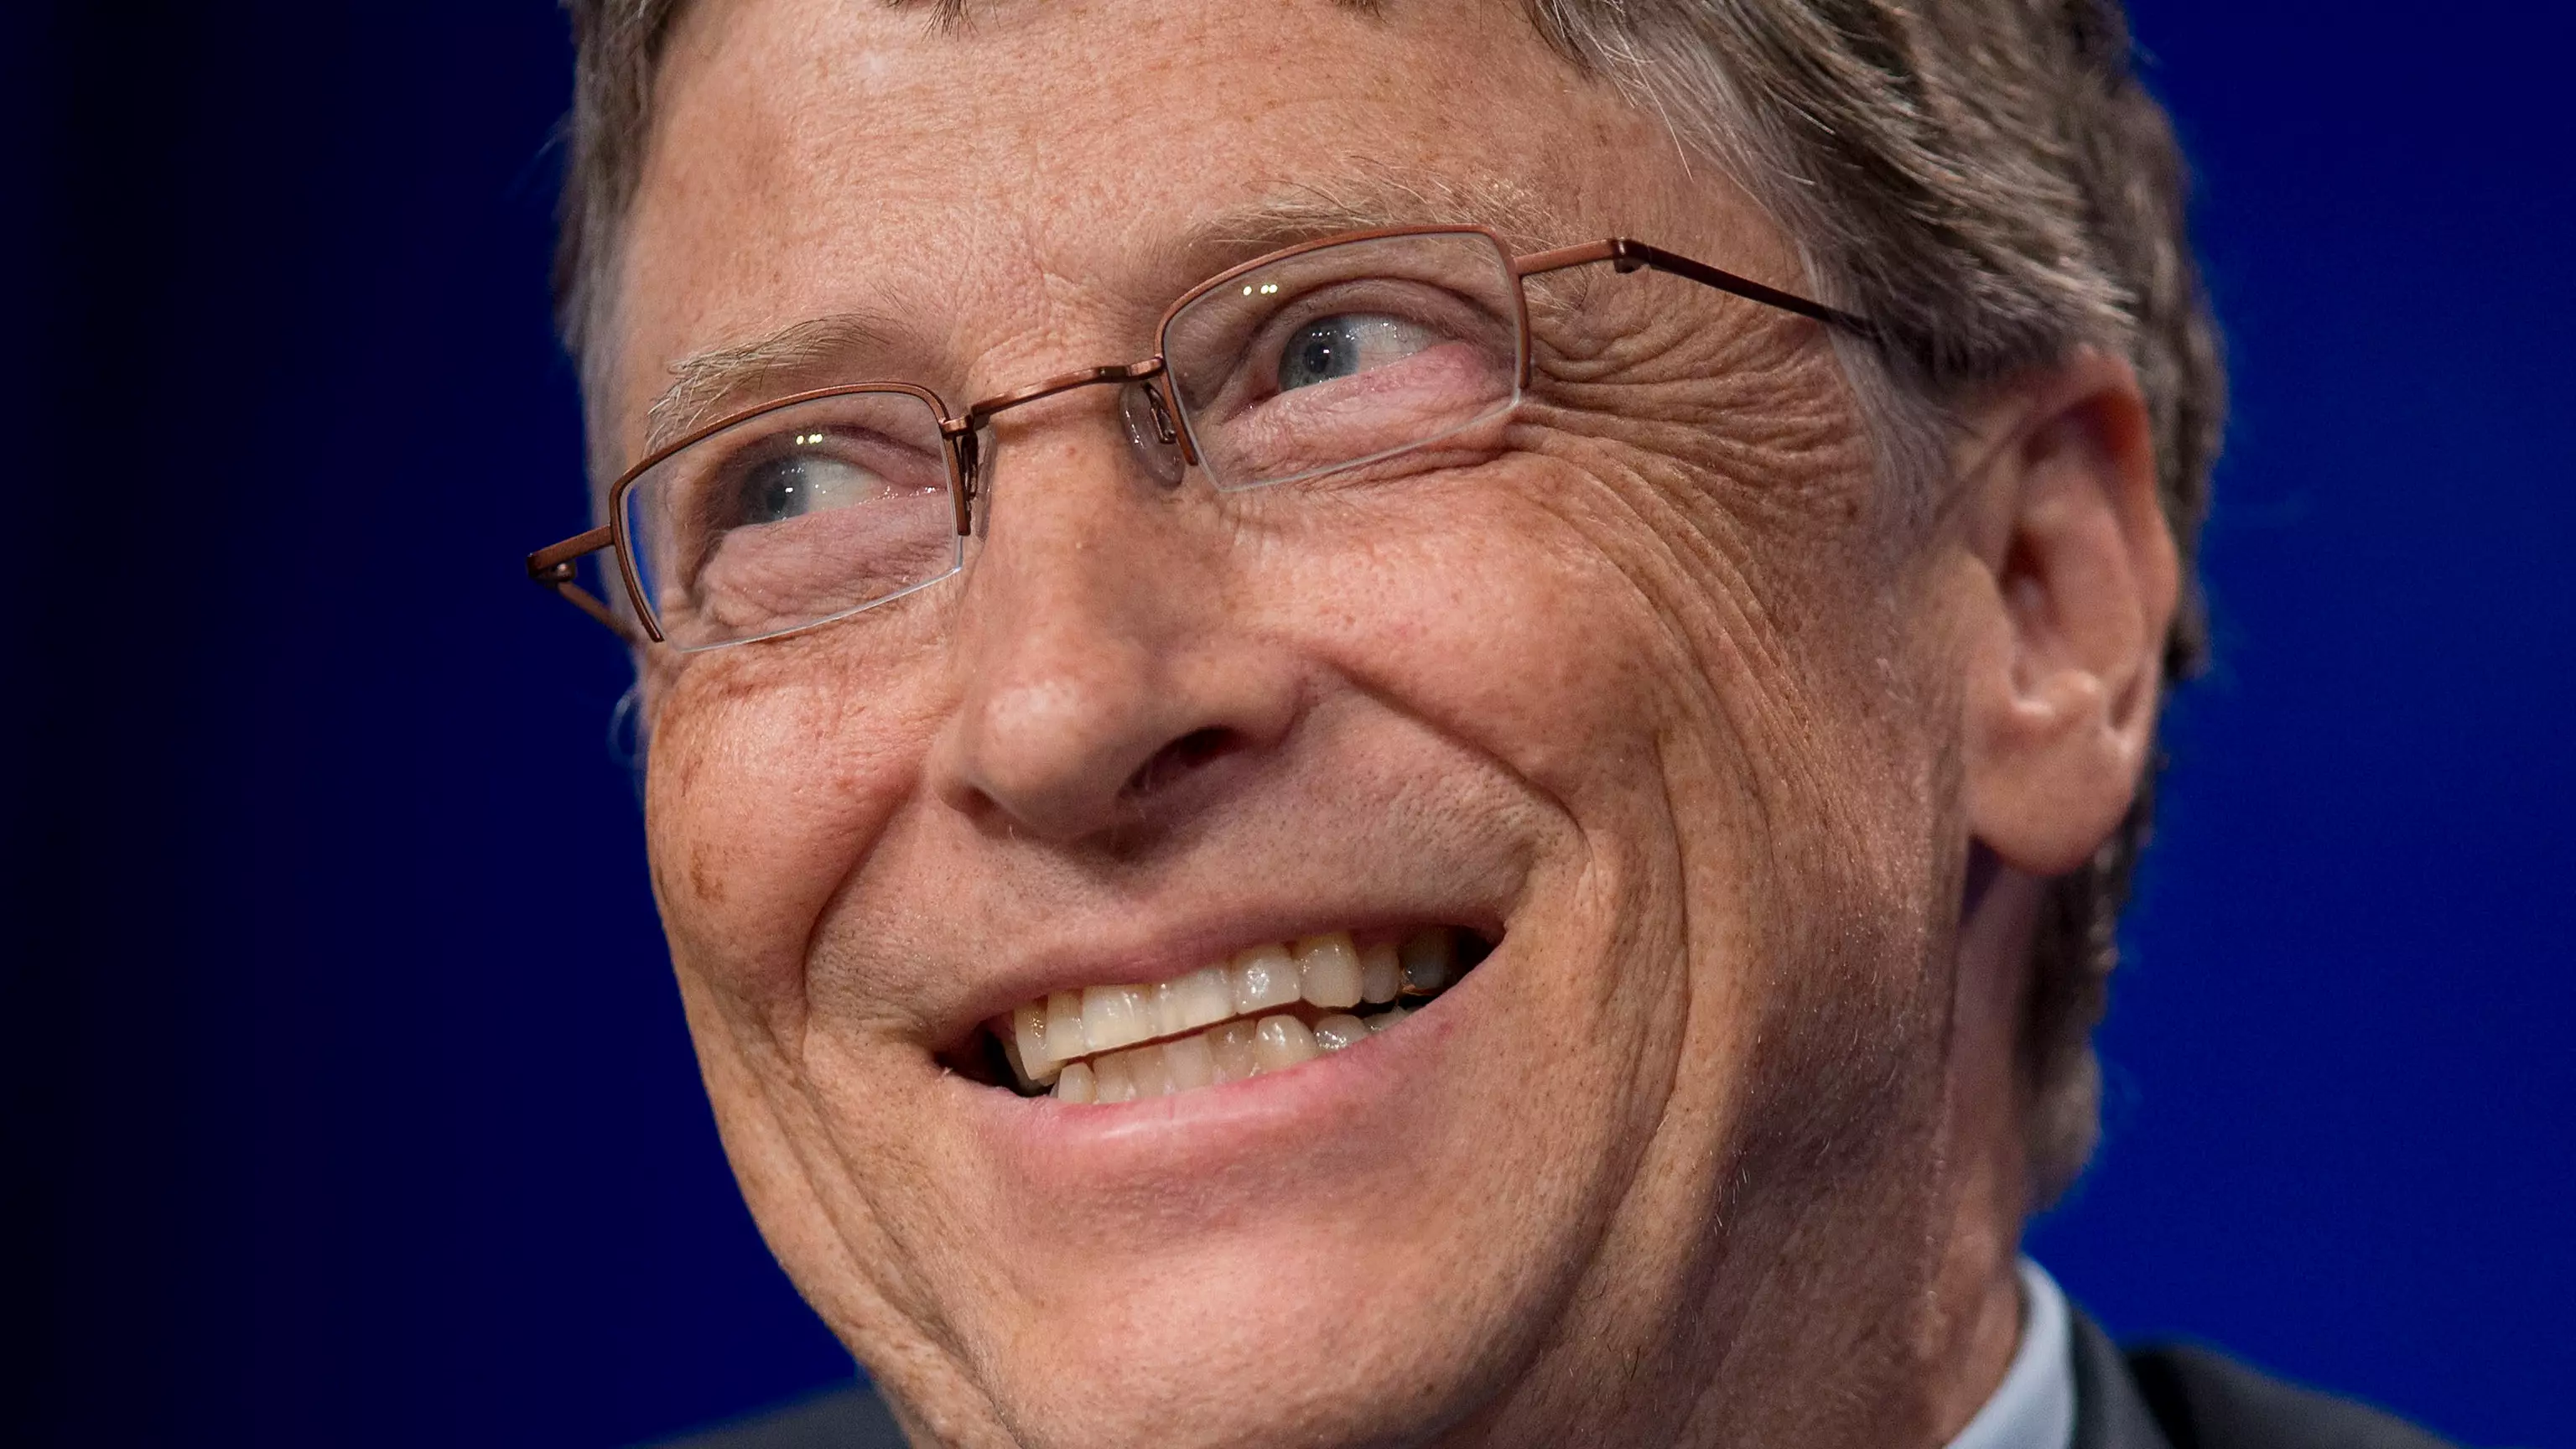 People Are Sliding Into Bill Gates' DMs After He And Wife Melinda Announce Divorce